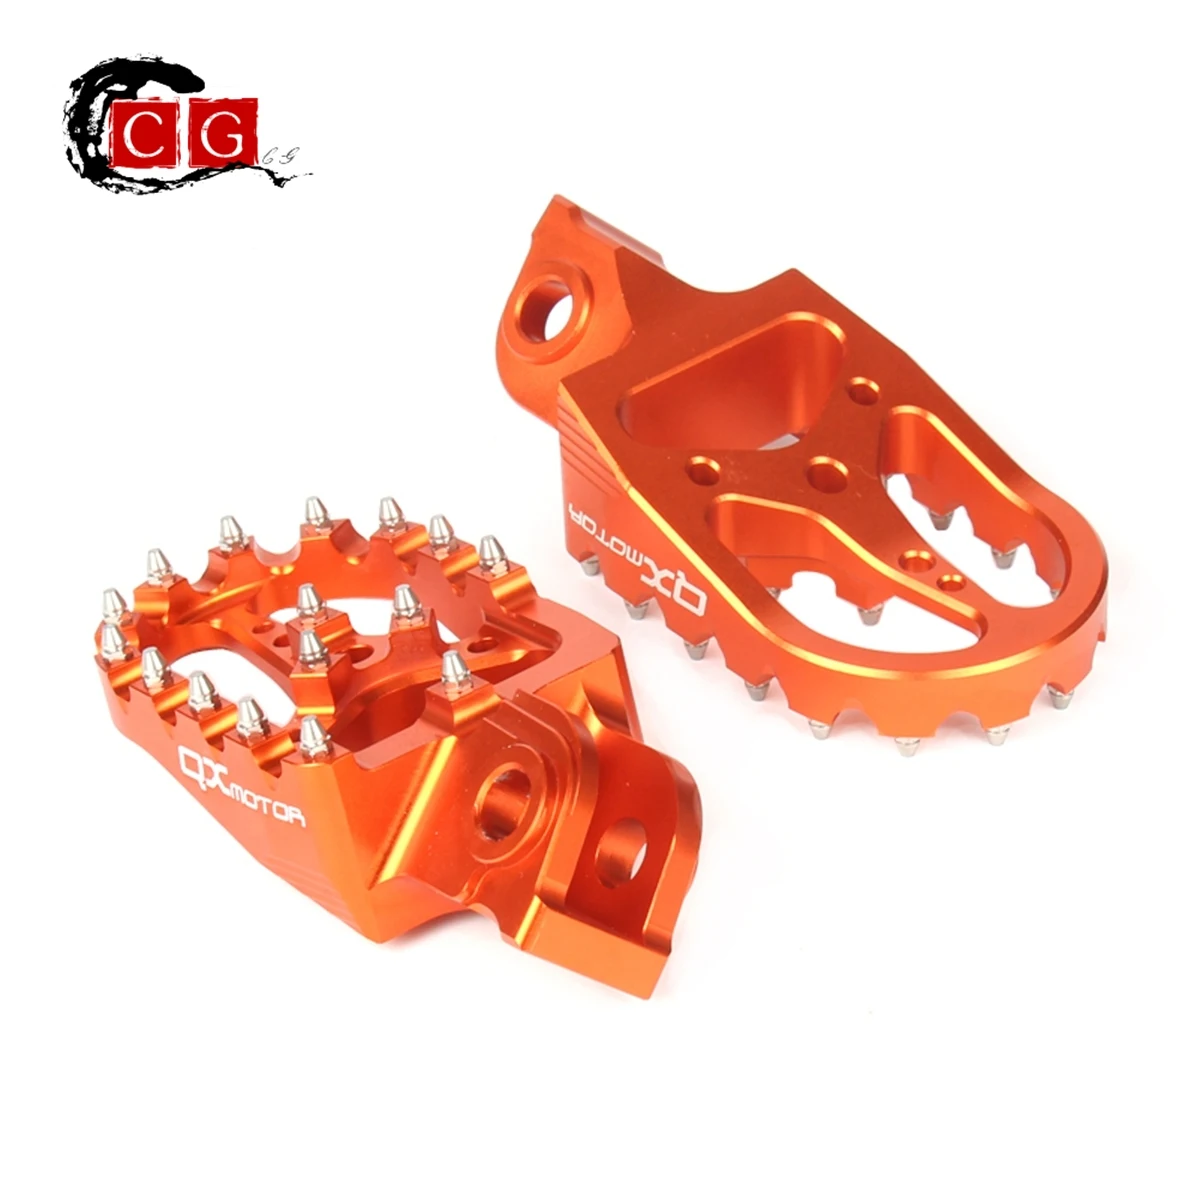 

High Quality CNC Foot Pegs Pedals Rests For KTM EXC SX SXF XC XCF EXCF EXCW XCFW MX SIX DAYS 65 85 125 200 250 300 350 525 530